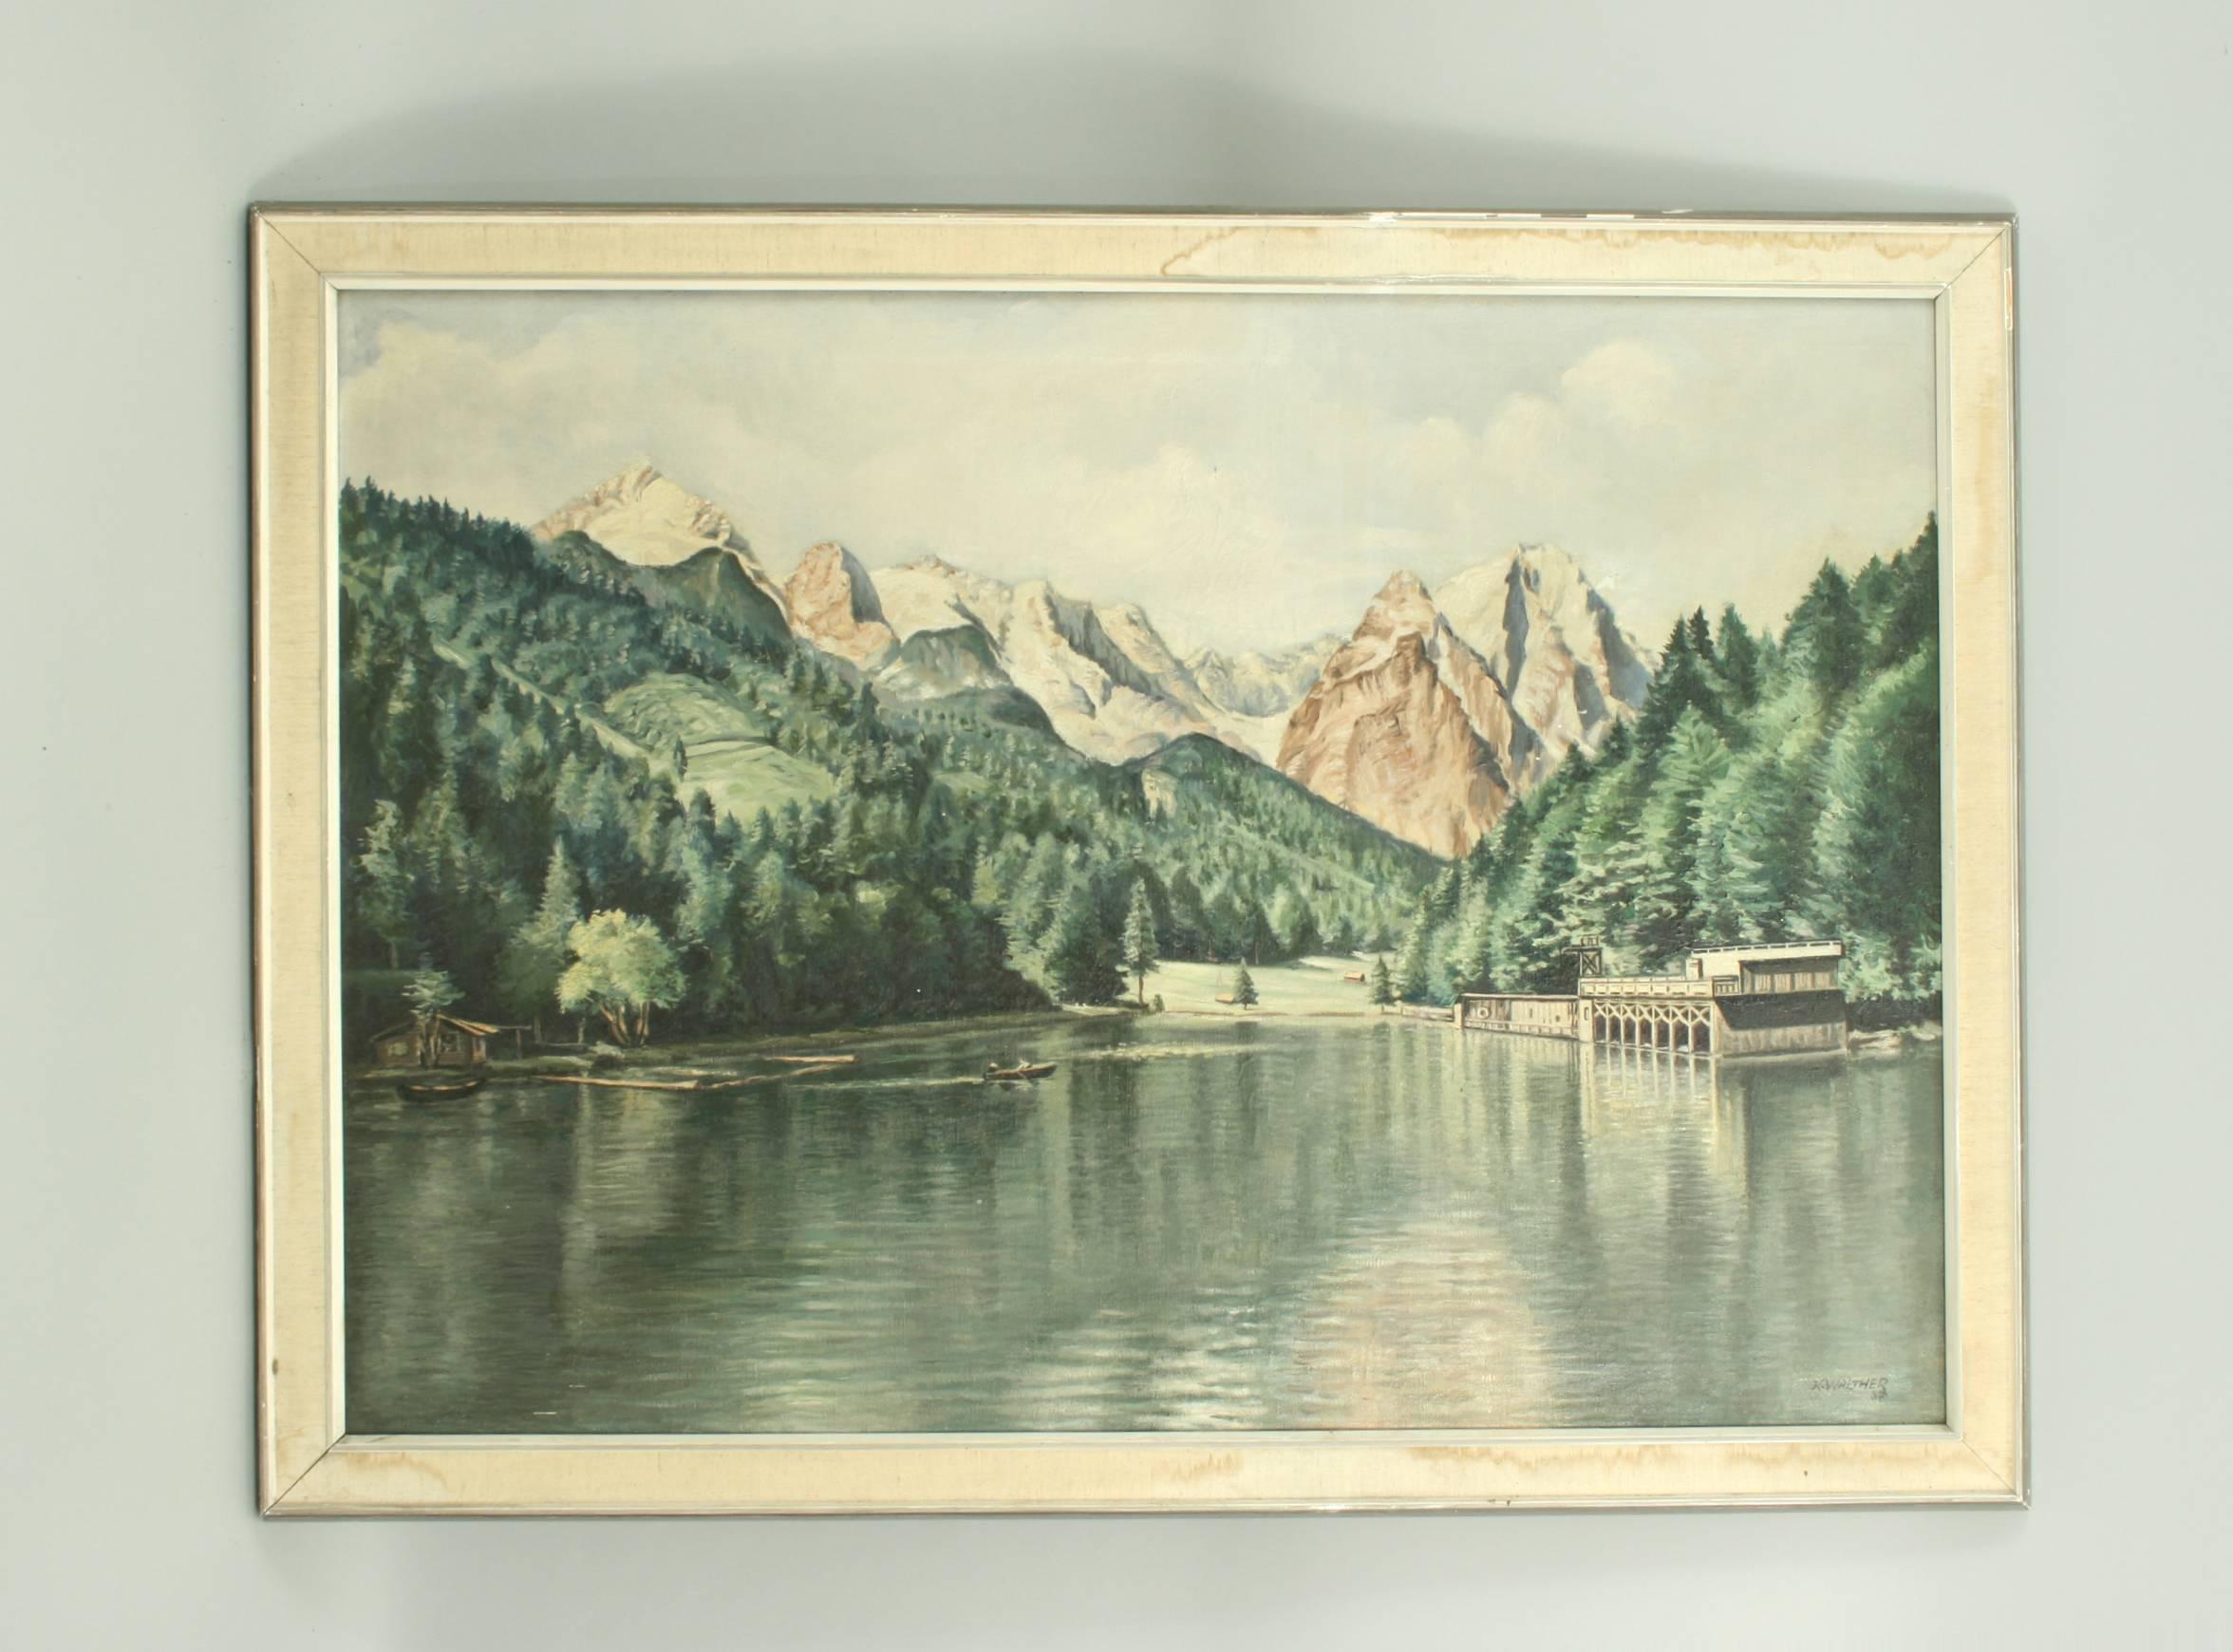 Oil painting Of Rissersee, Germany.
A very scenic oil painting of Rissersee, a lake in Grainau near Garmisch - Partenkirchen, surrounded by the Bavarian Alps. Painted by the German artist Karl Walther (1880–1954). It sits right at the foot of the